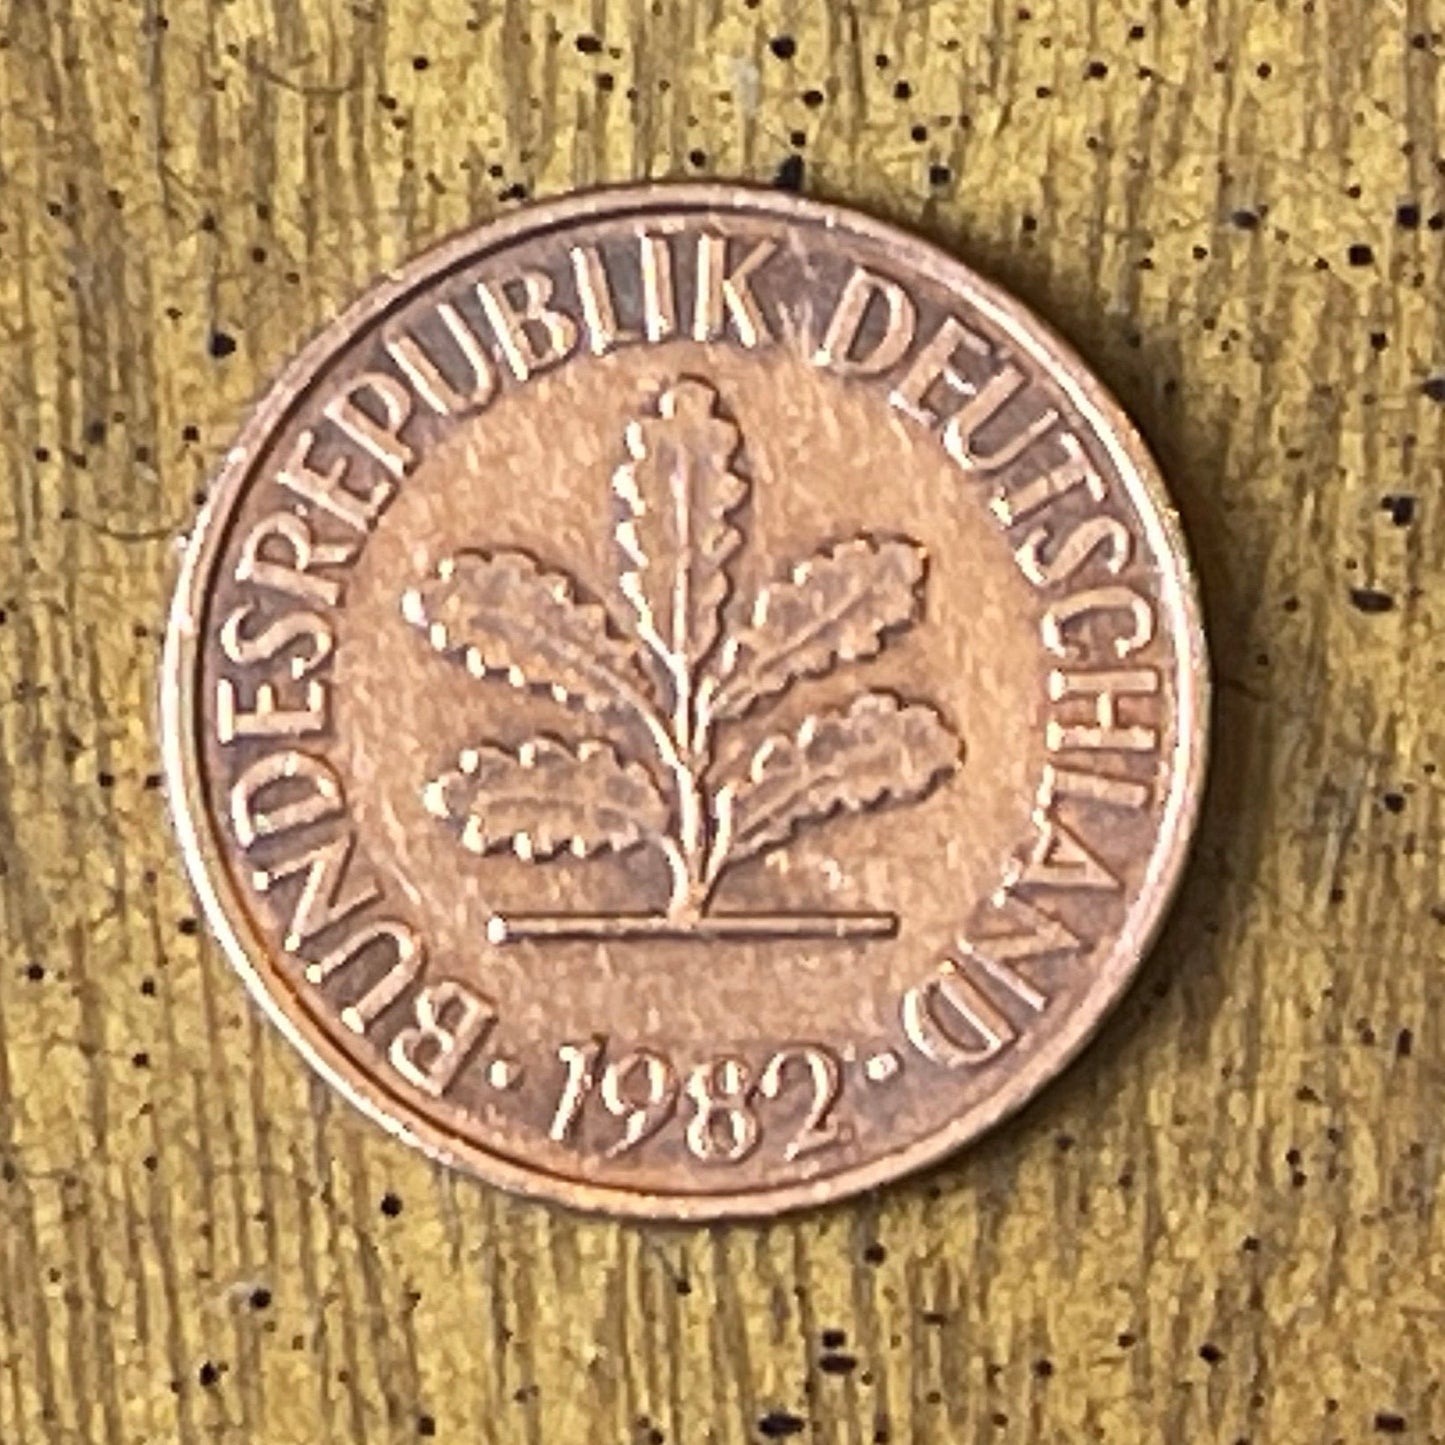 Oak Seedling 2 Pfennig German Authentic Coin Money for Jewelry and Craft Making